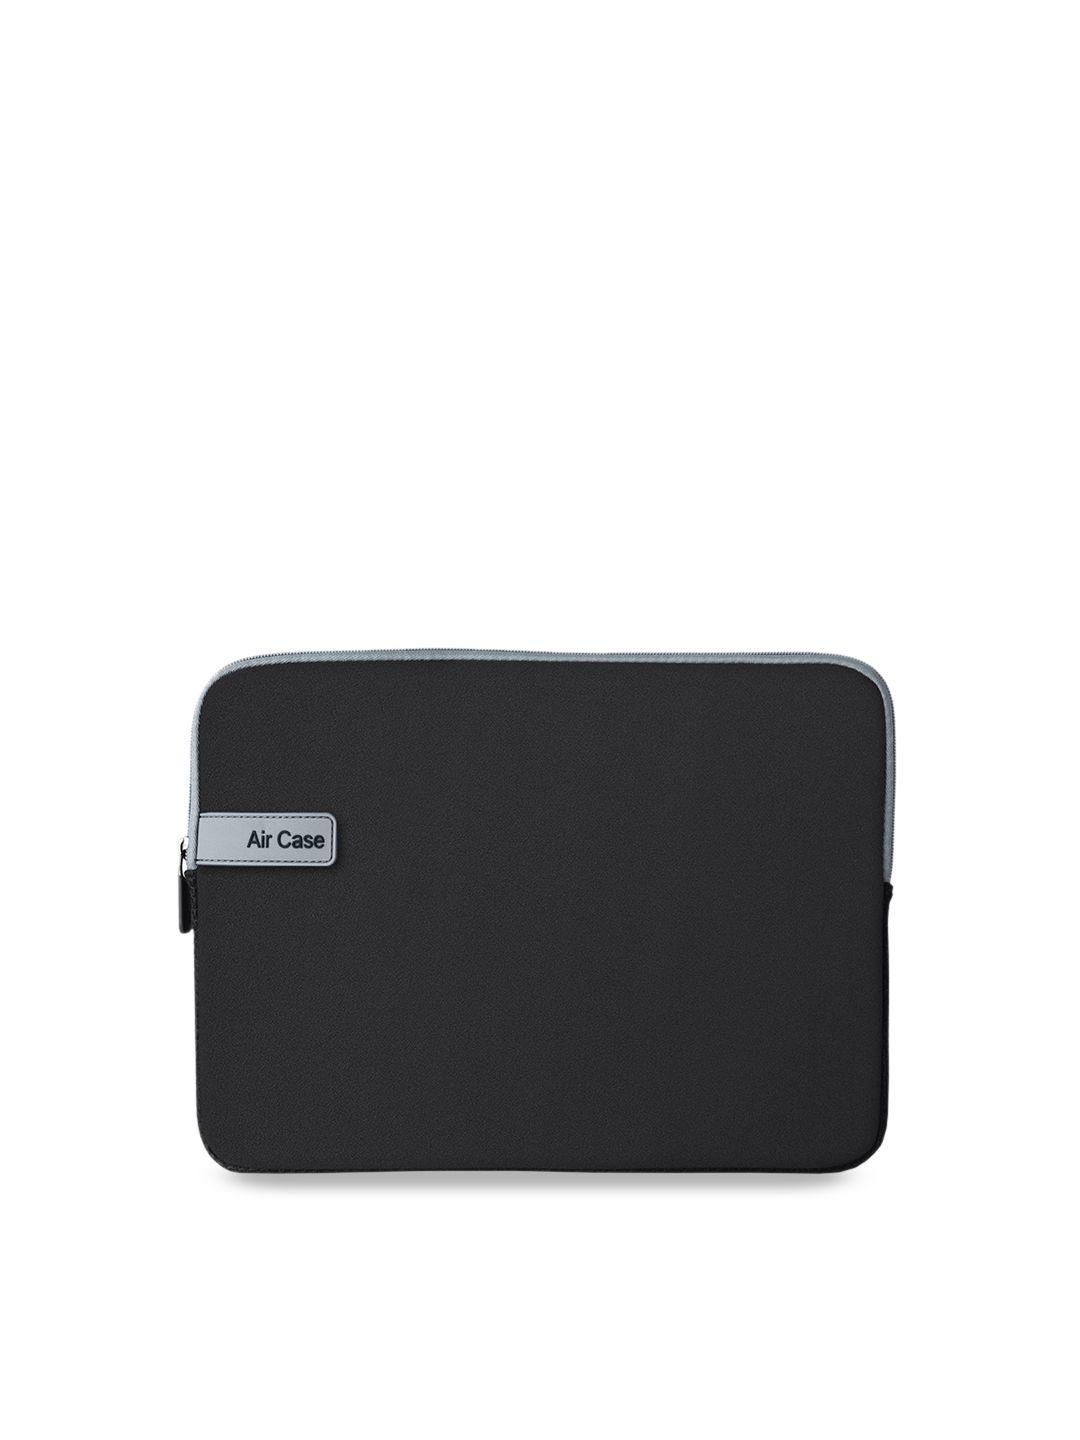 aircase unisex black solid 11.6 inch laptop sleeve